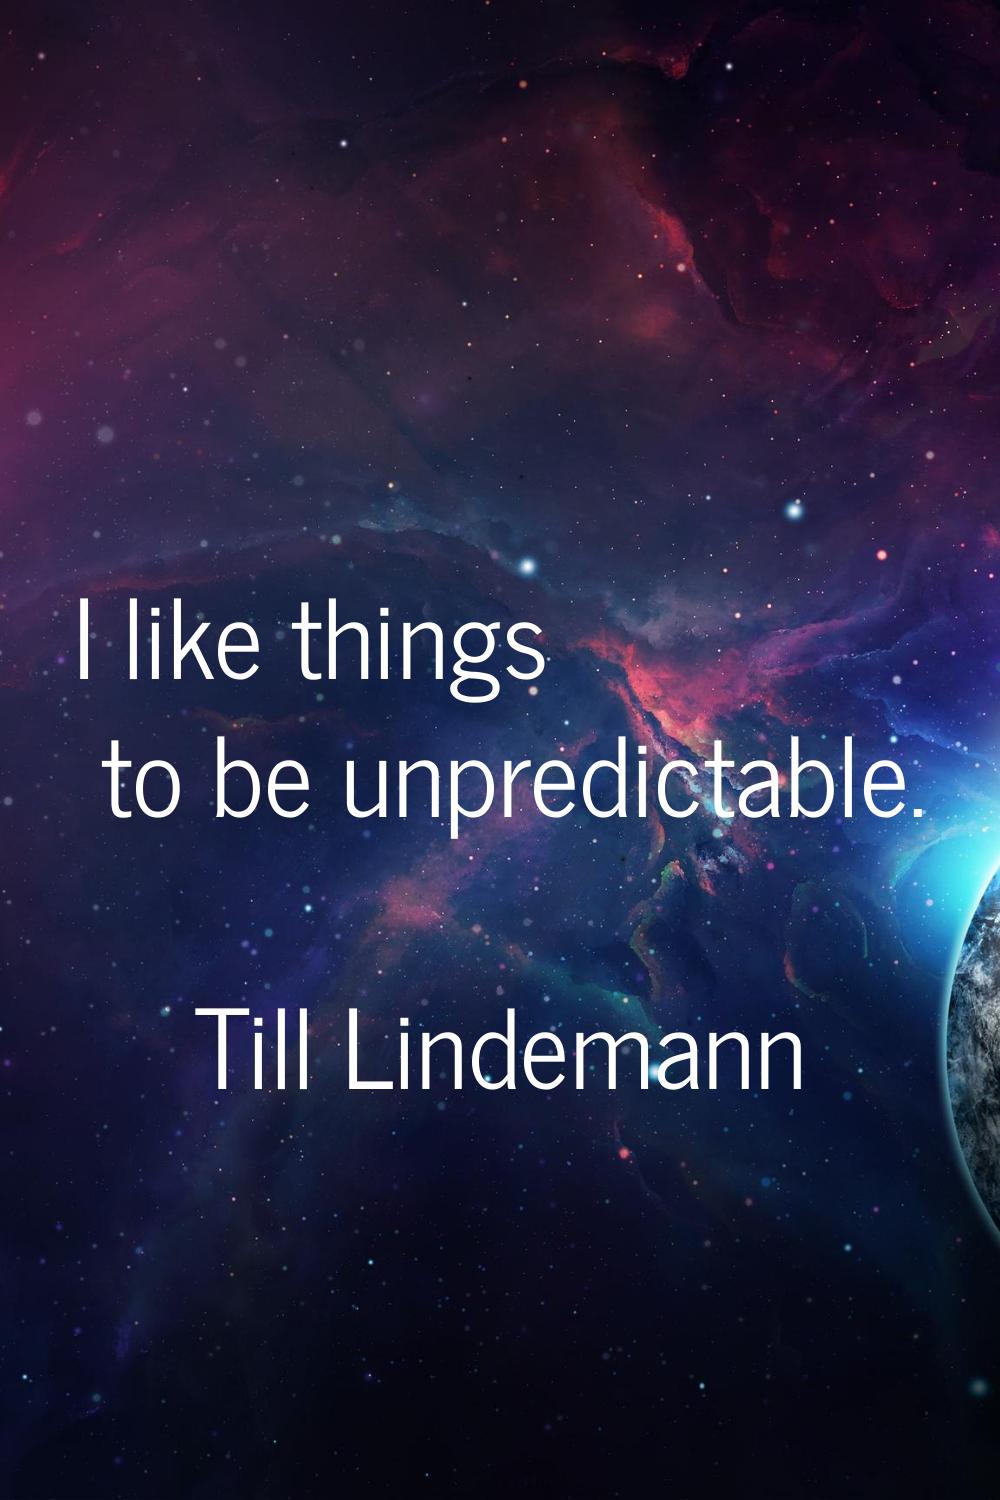 I like things to be unpredictable.